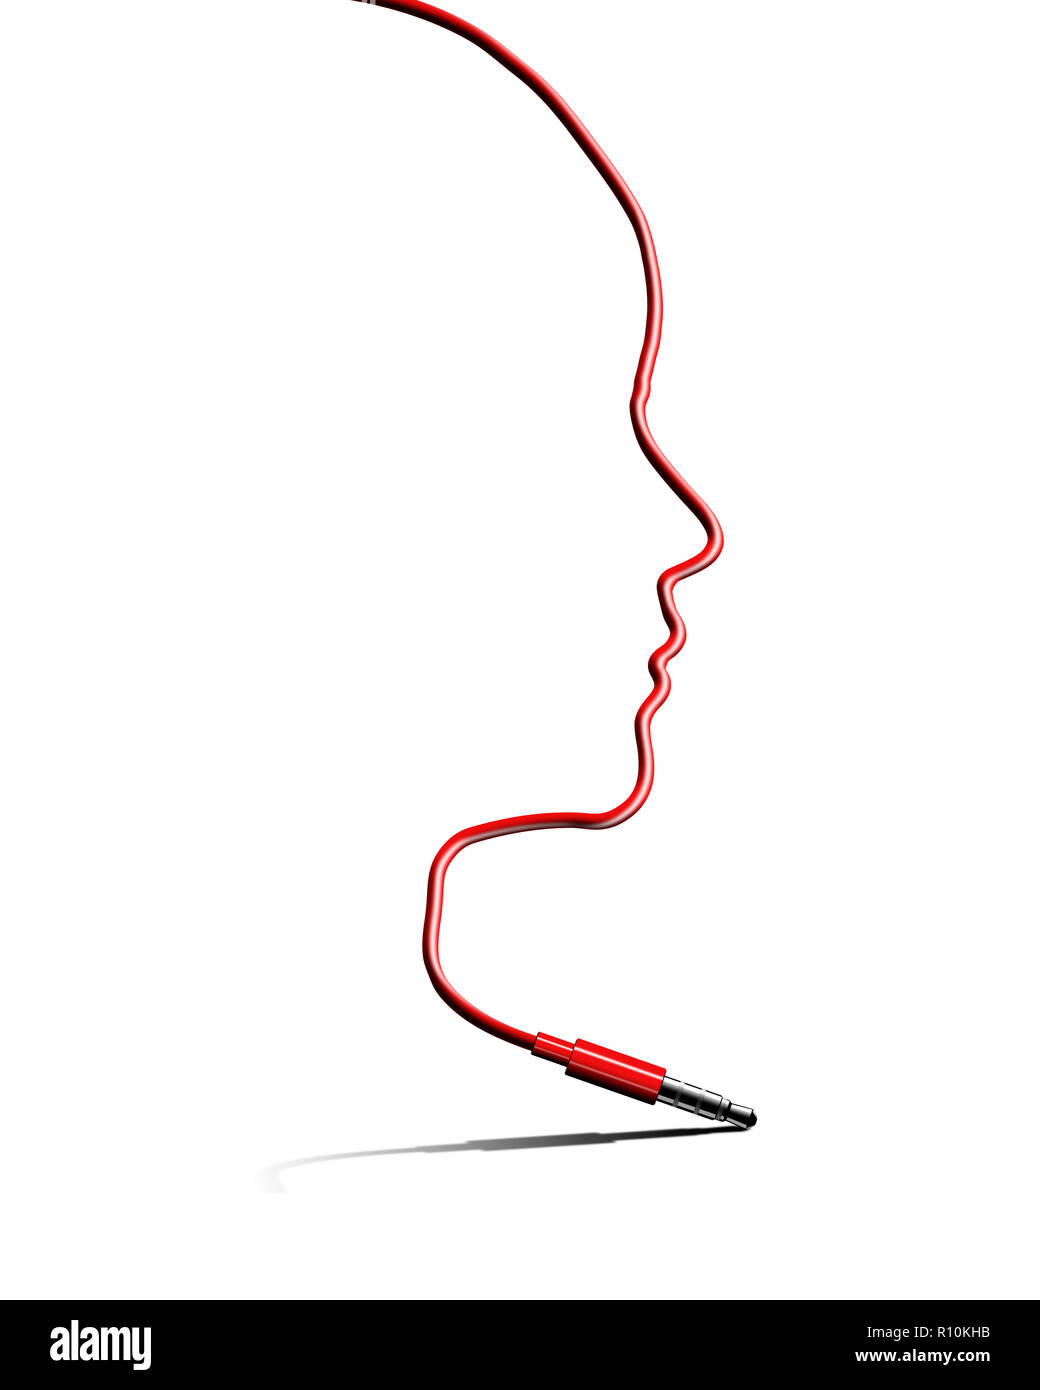 Red wire cable outlining profile of human face Stock Photo